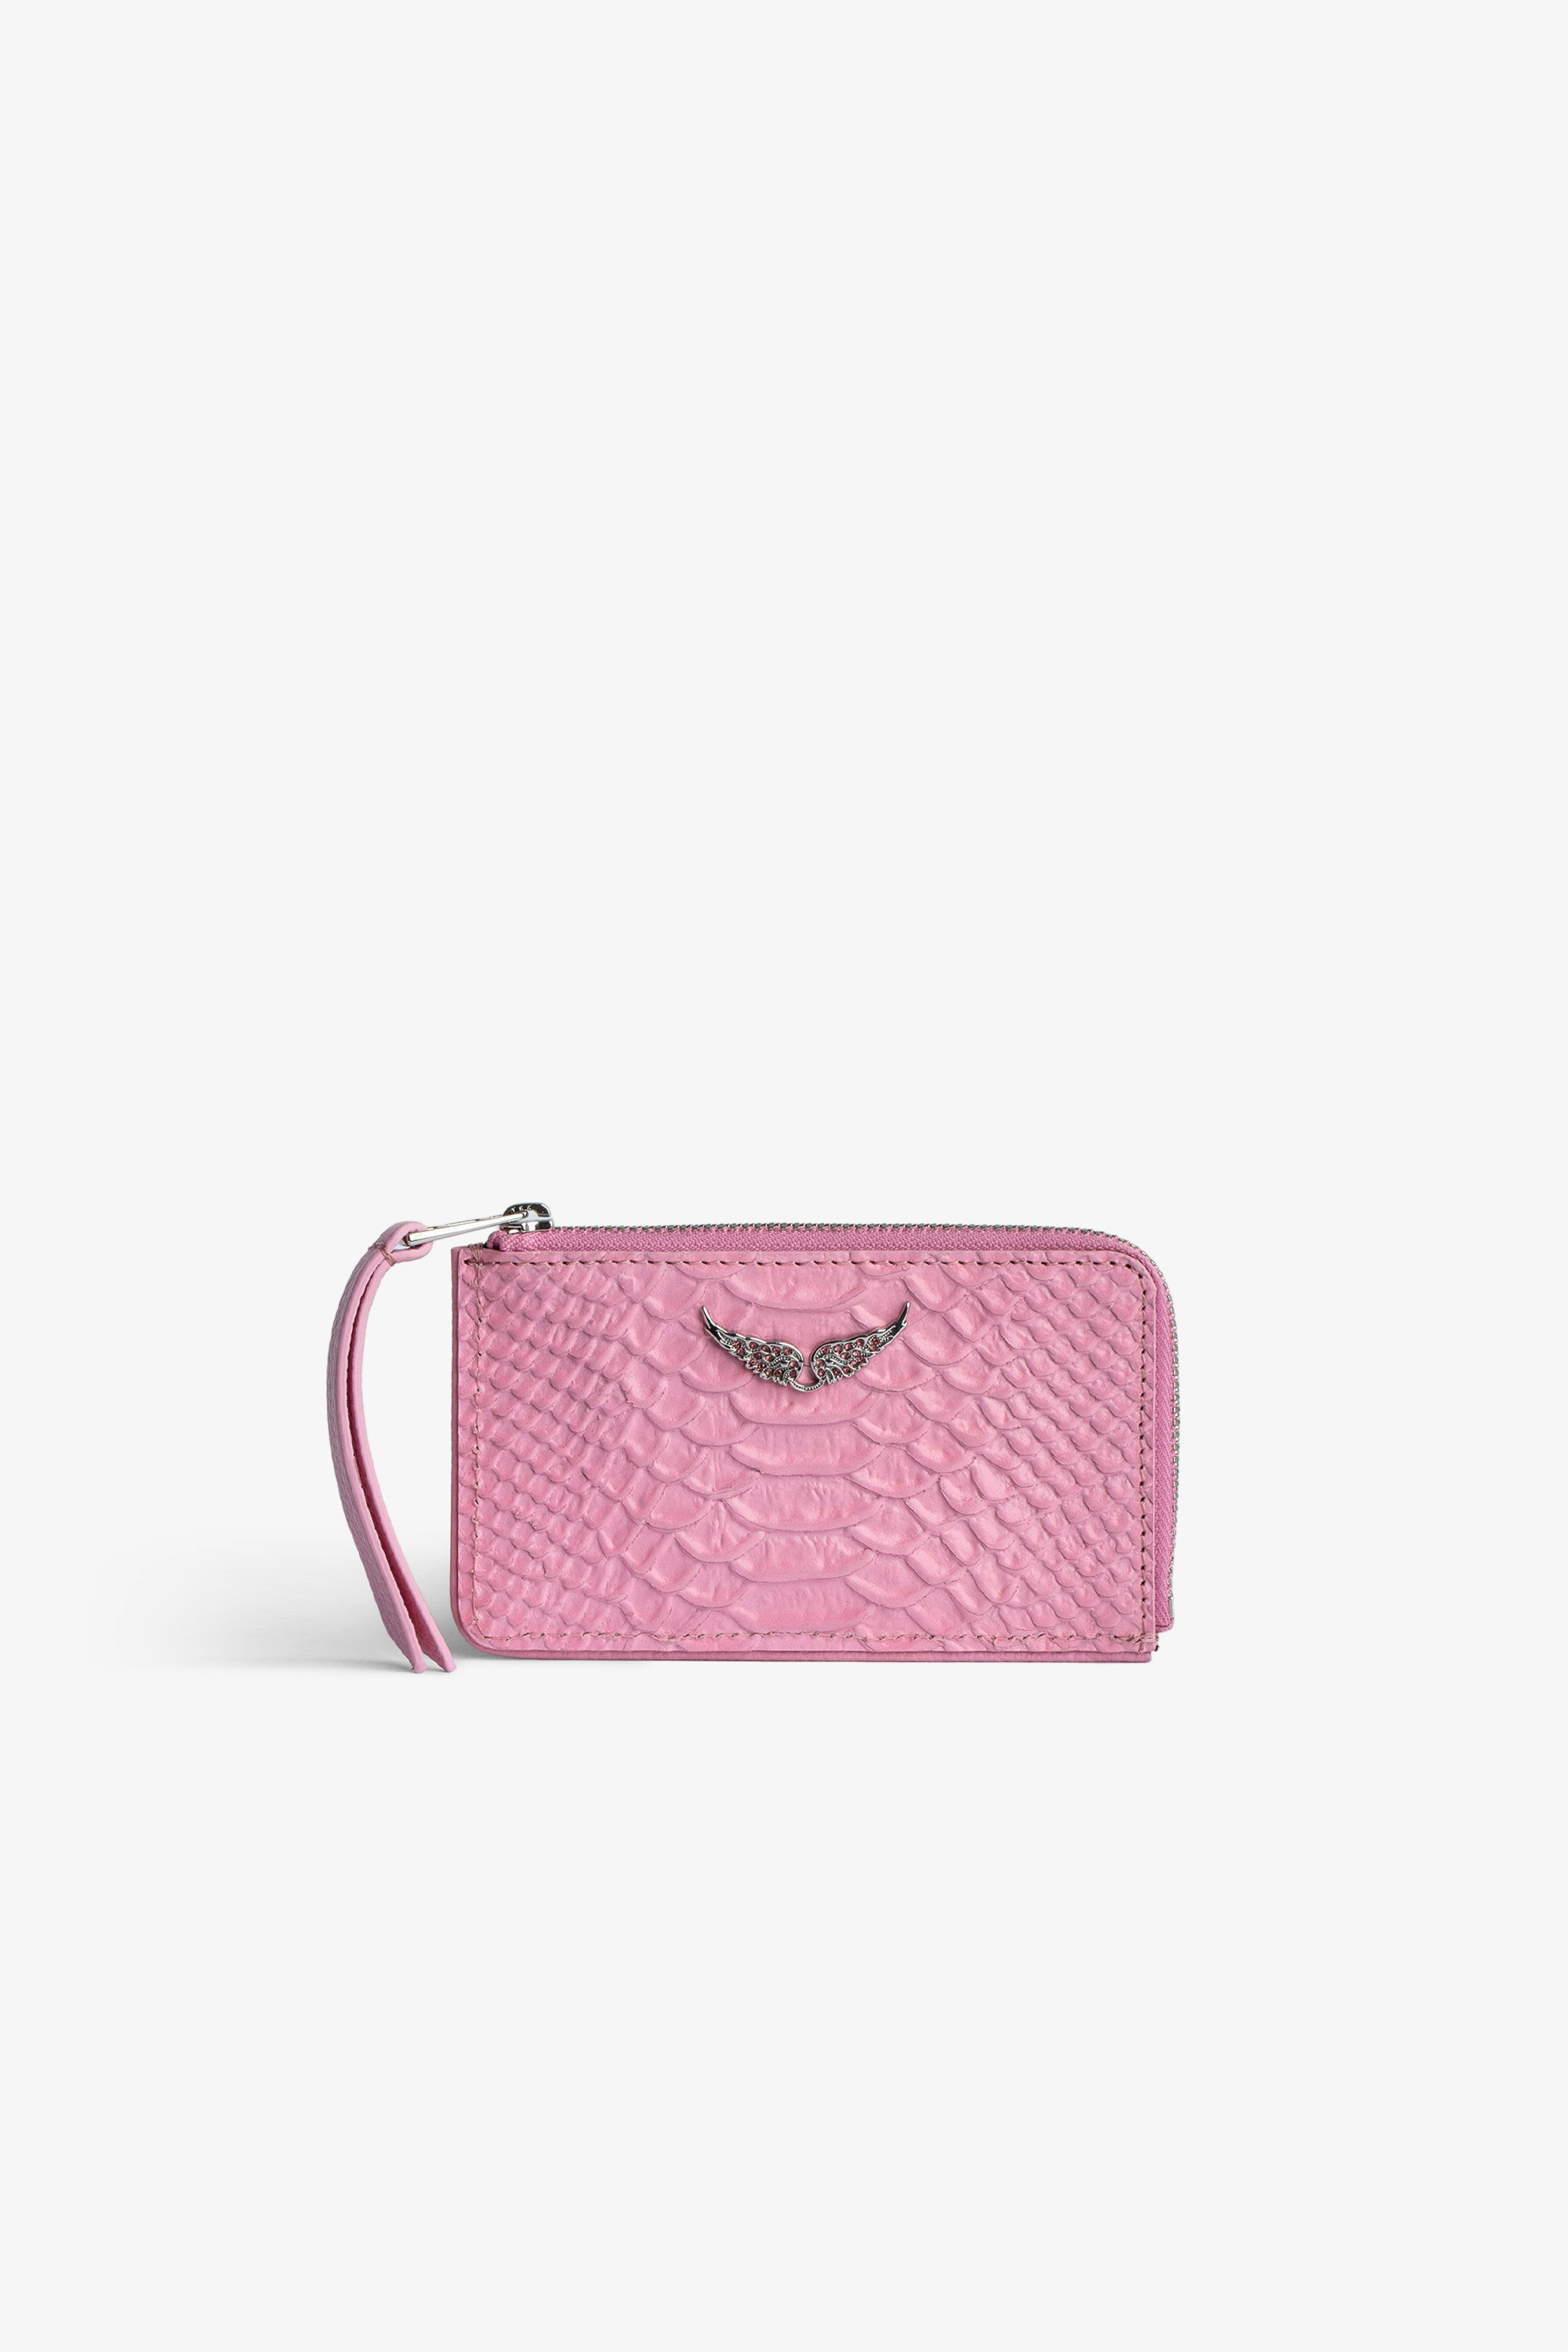 ZV Card Savage 財布 Women’s card holder in pink python-effect leather